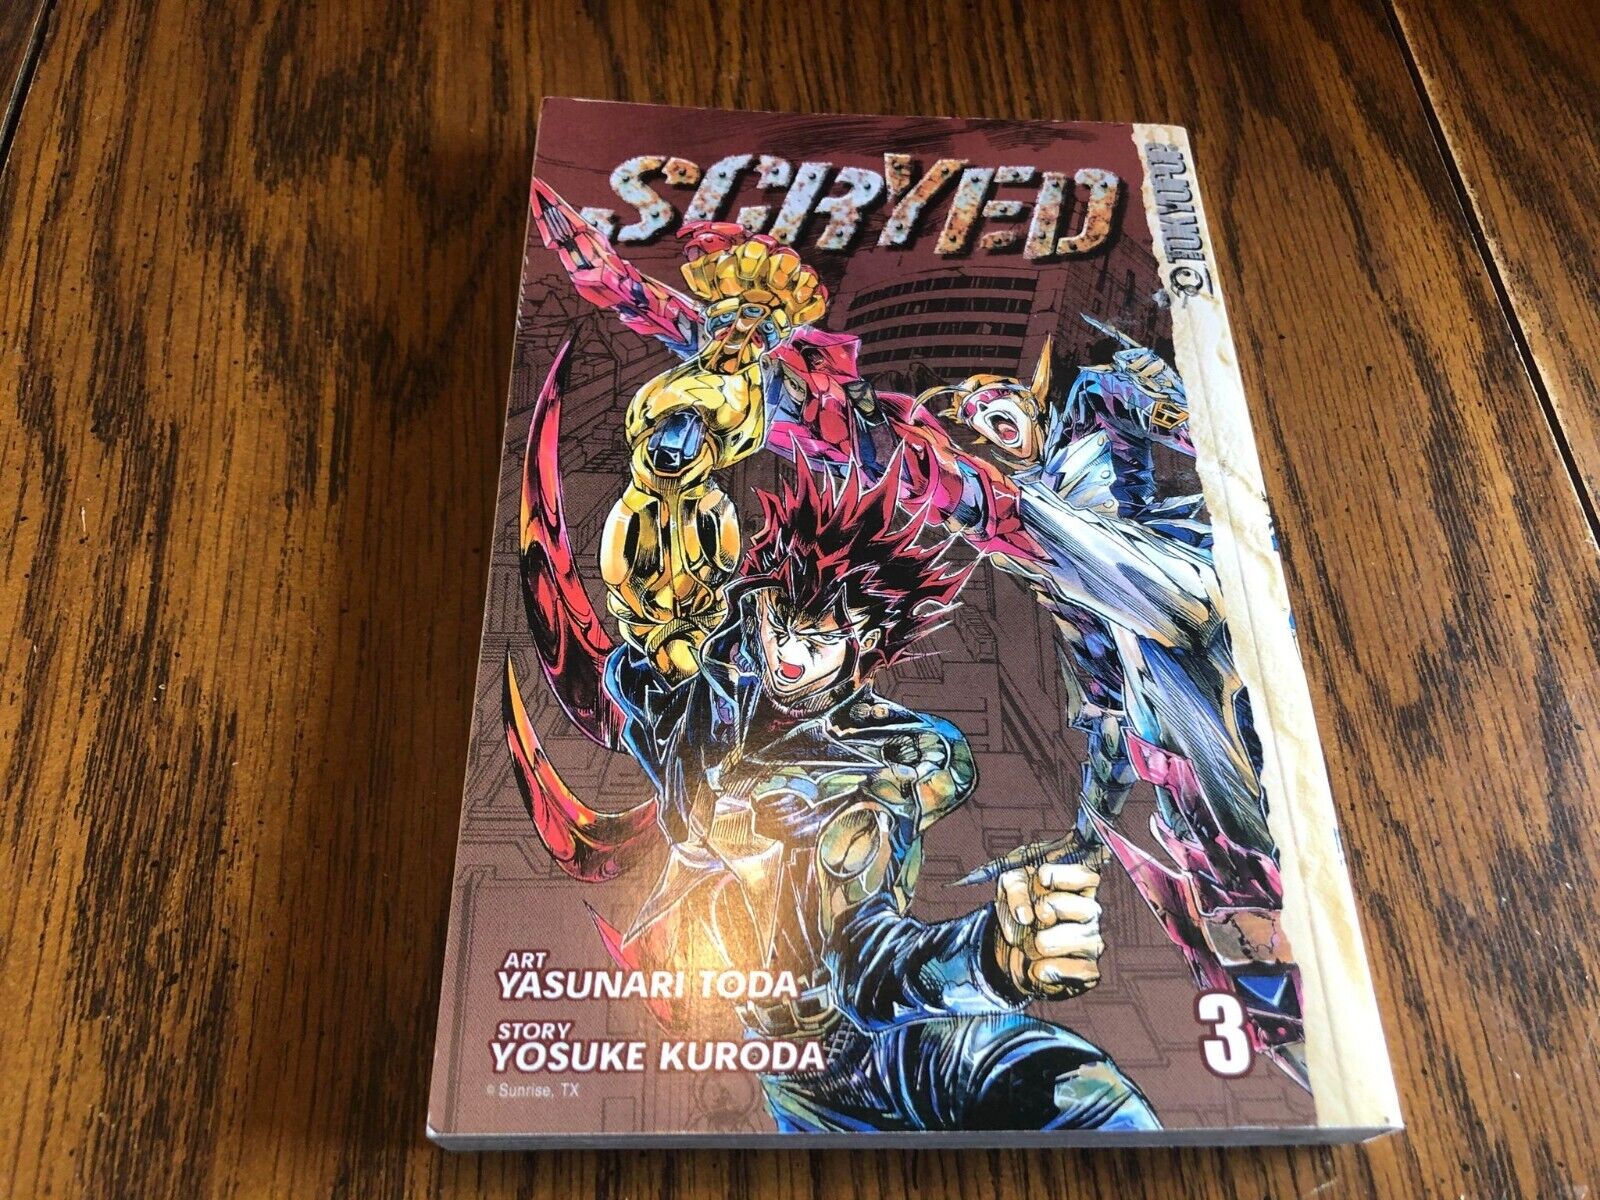 Scryed manga vol 3. Great Condition